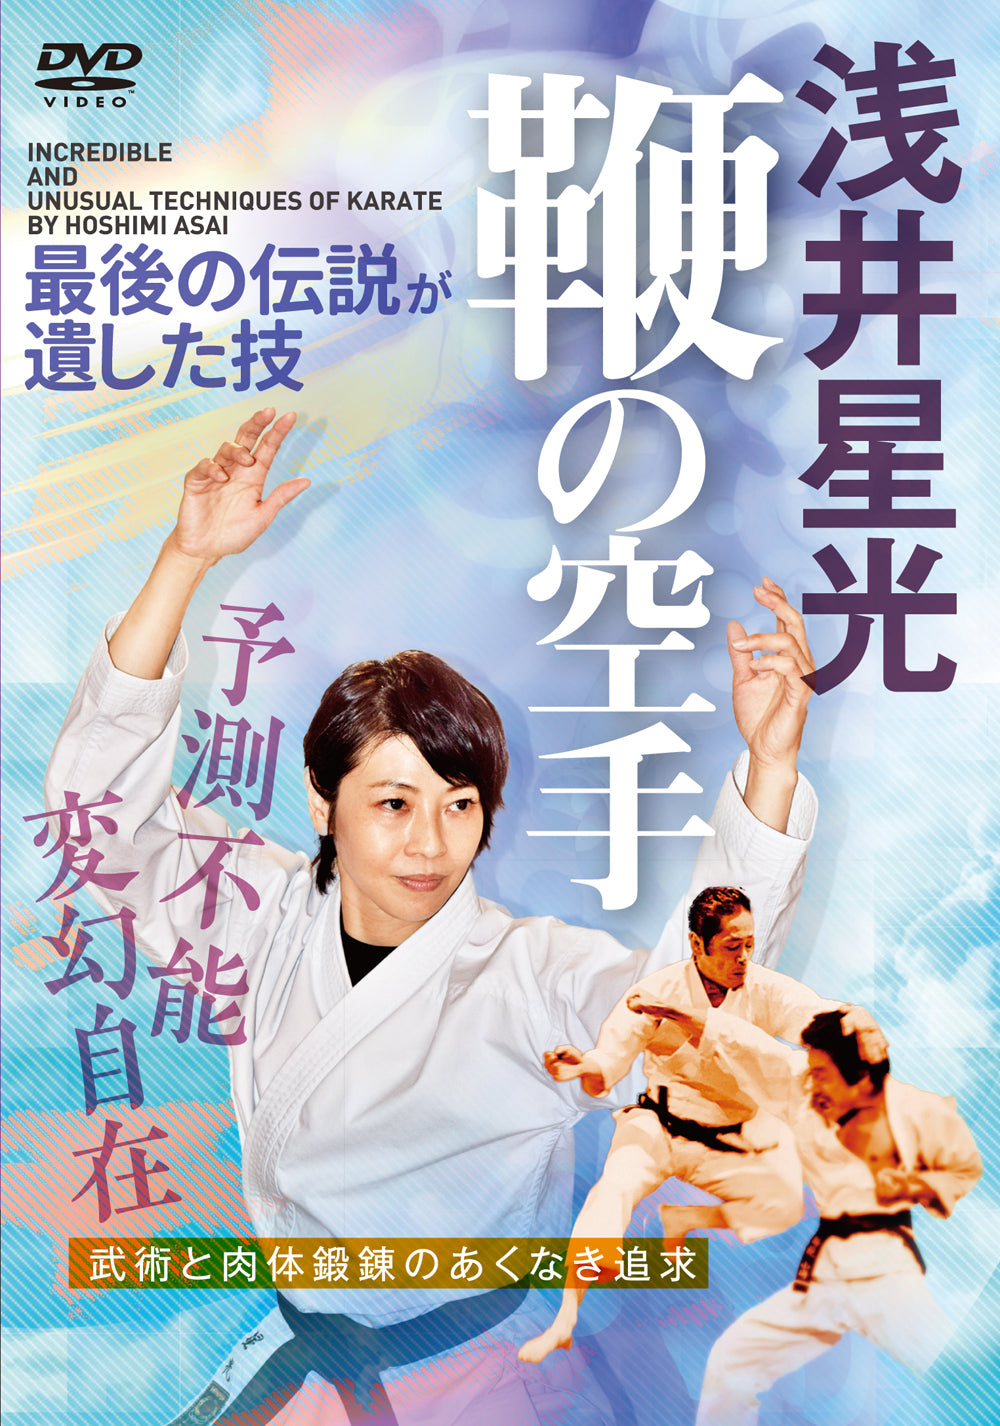 Incredible & Unusual Karate Techniques DVD by Hoshimi Asai